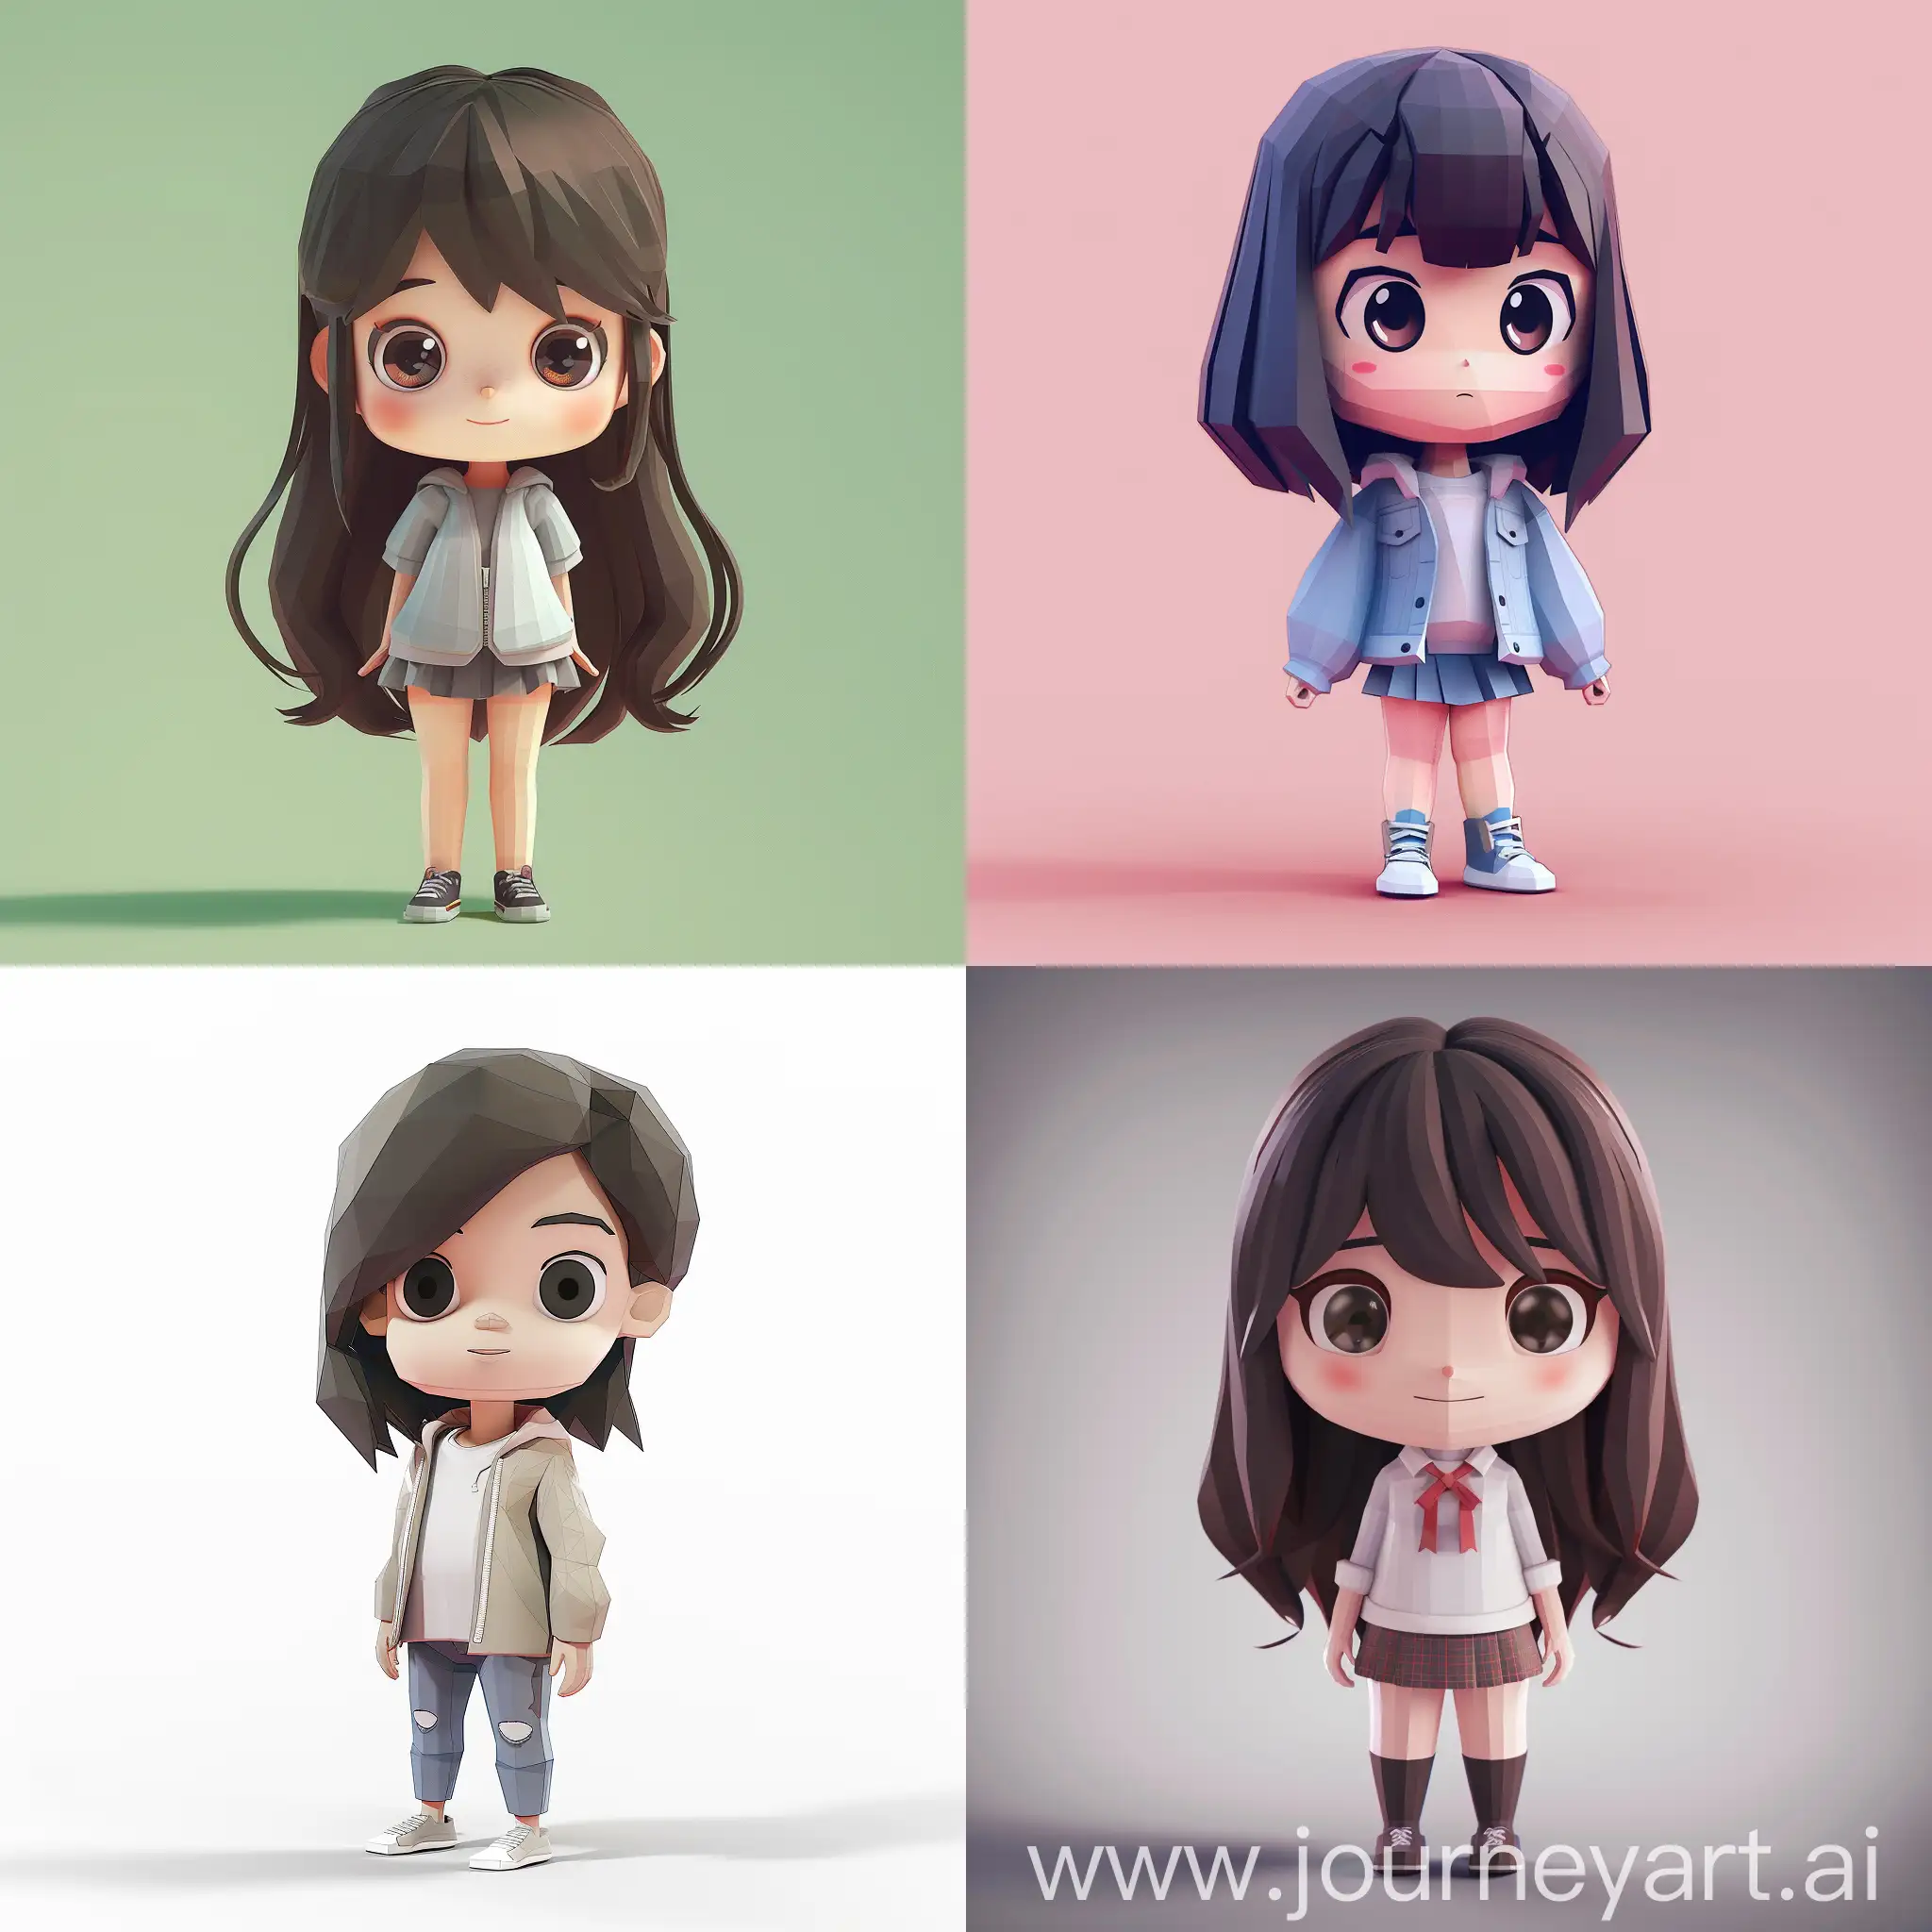 low poly, cute chibi girl character, from the front